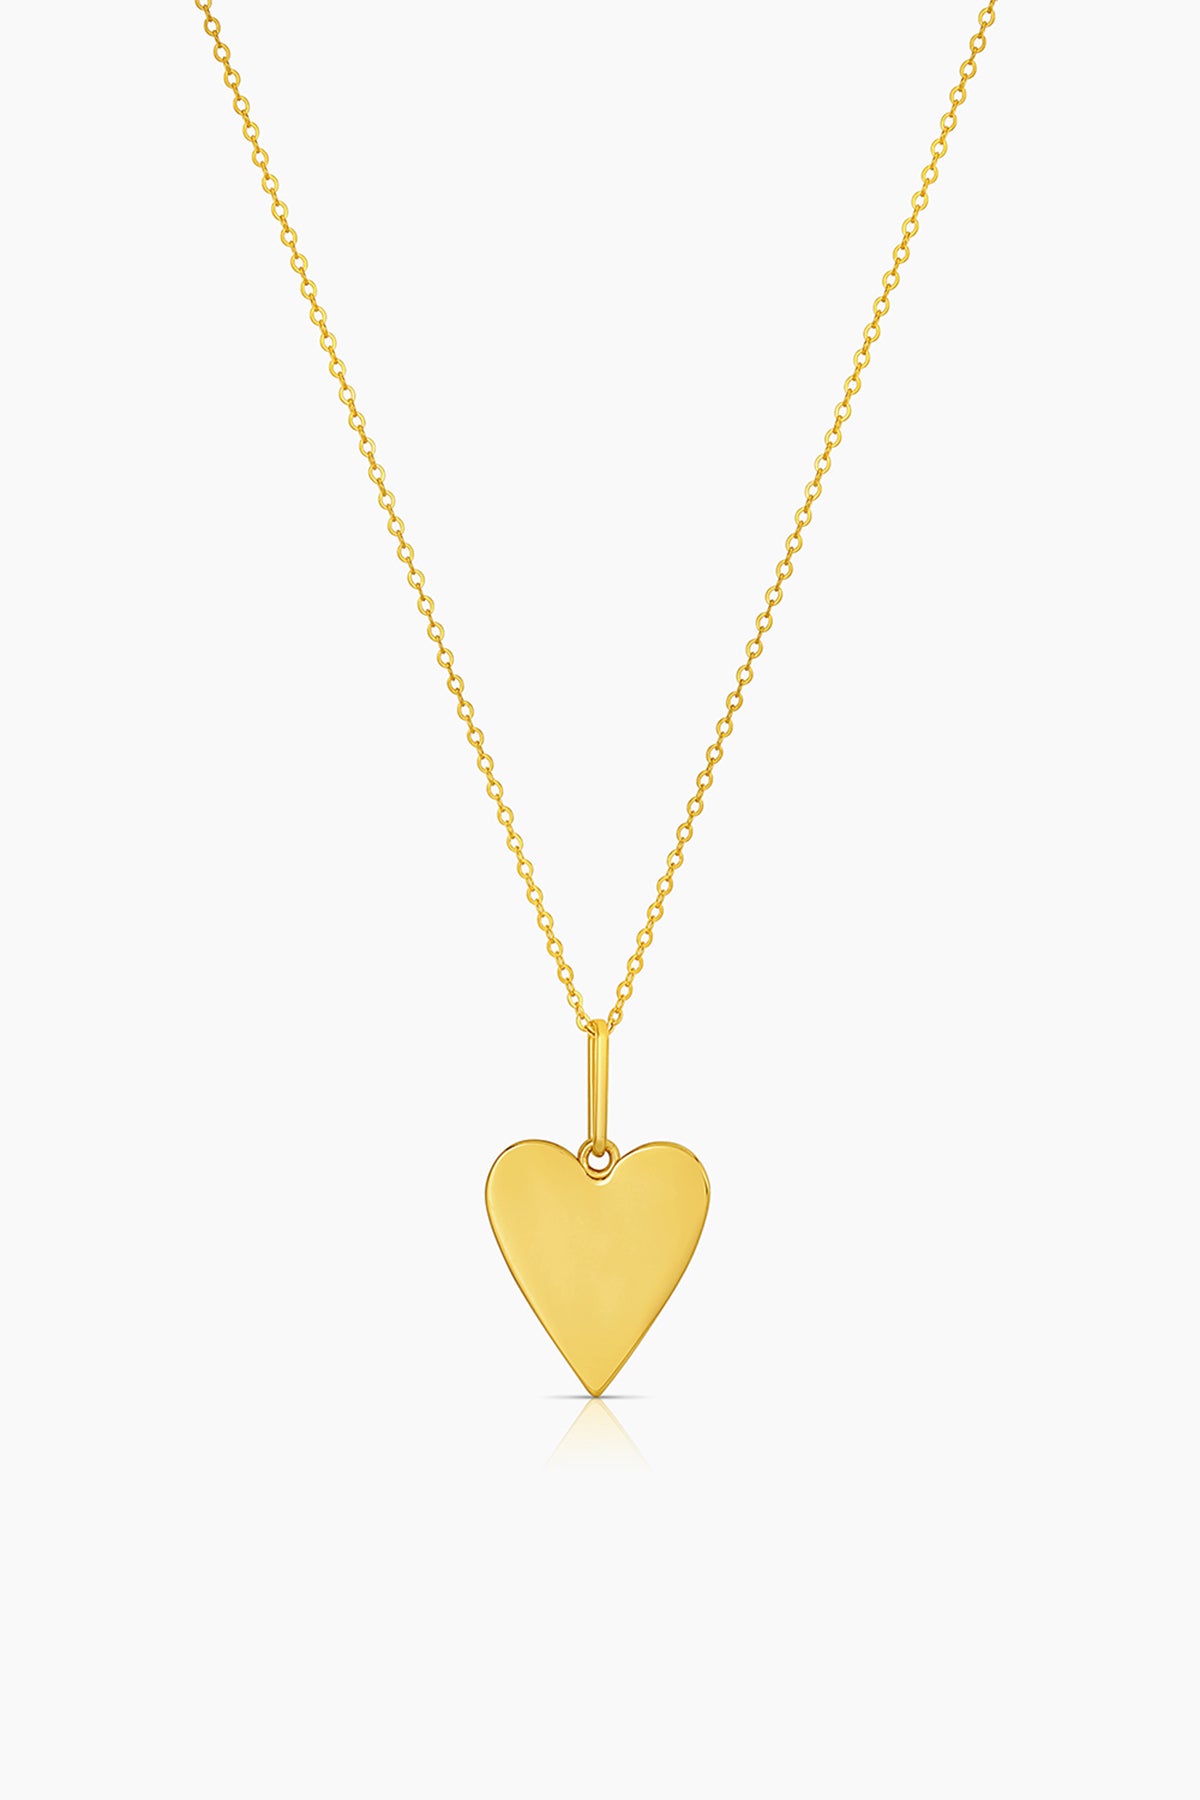   A small AMAYA HEART NECKLACE BY THATCH pendant on a chain. 